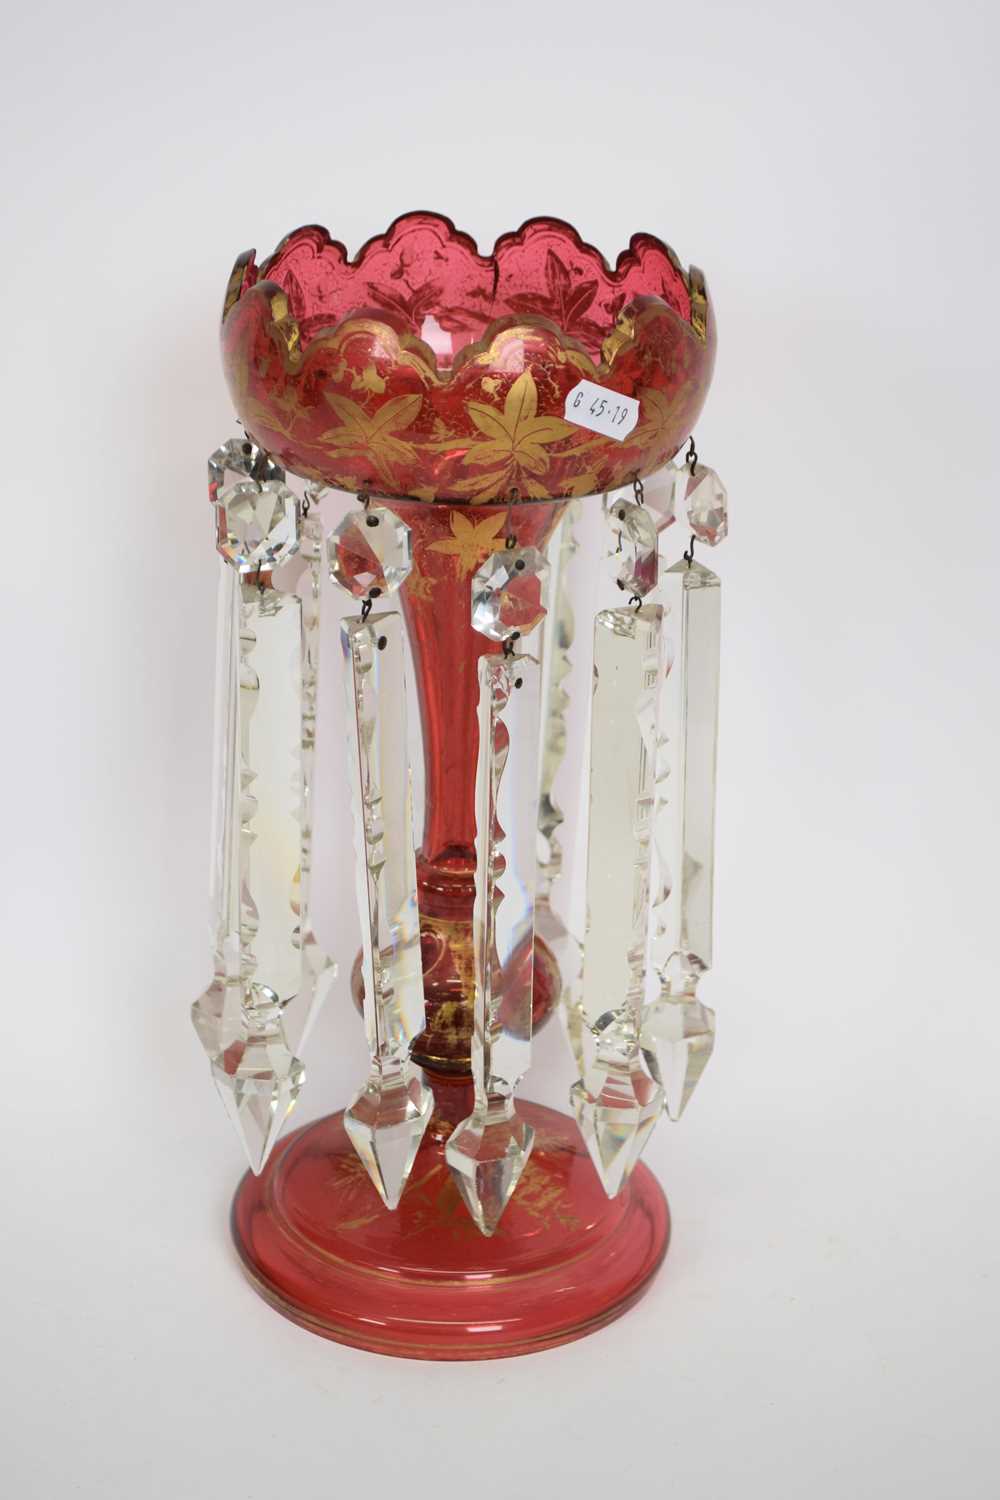 Ruby table lustre with gilt floral design